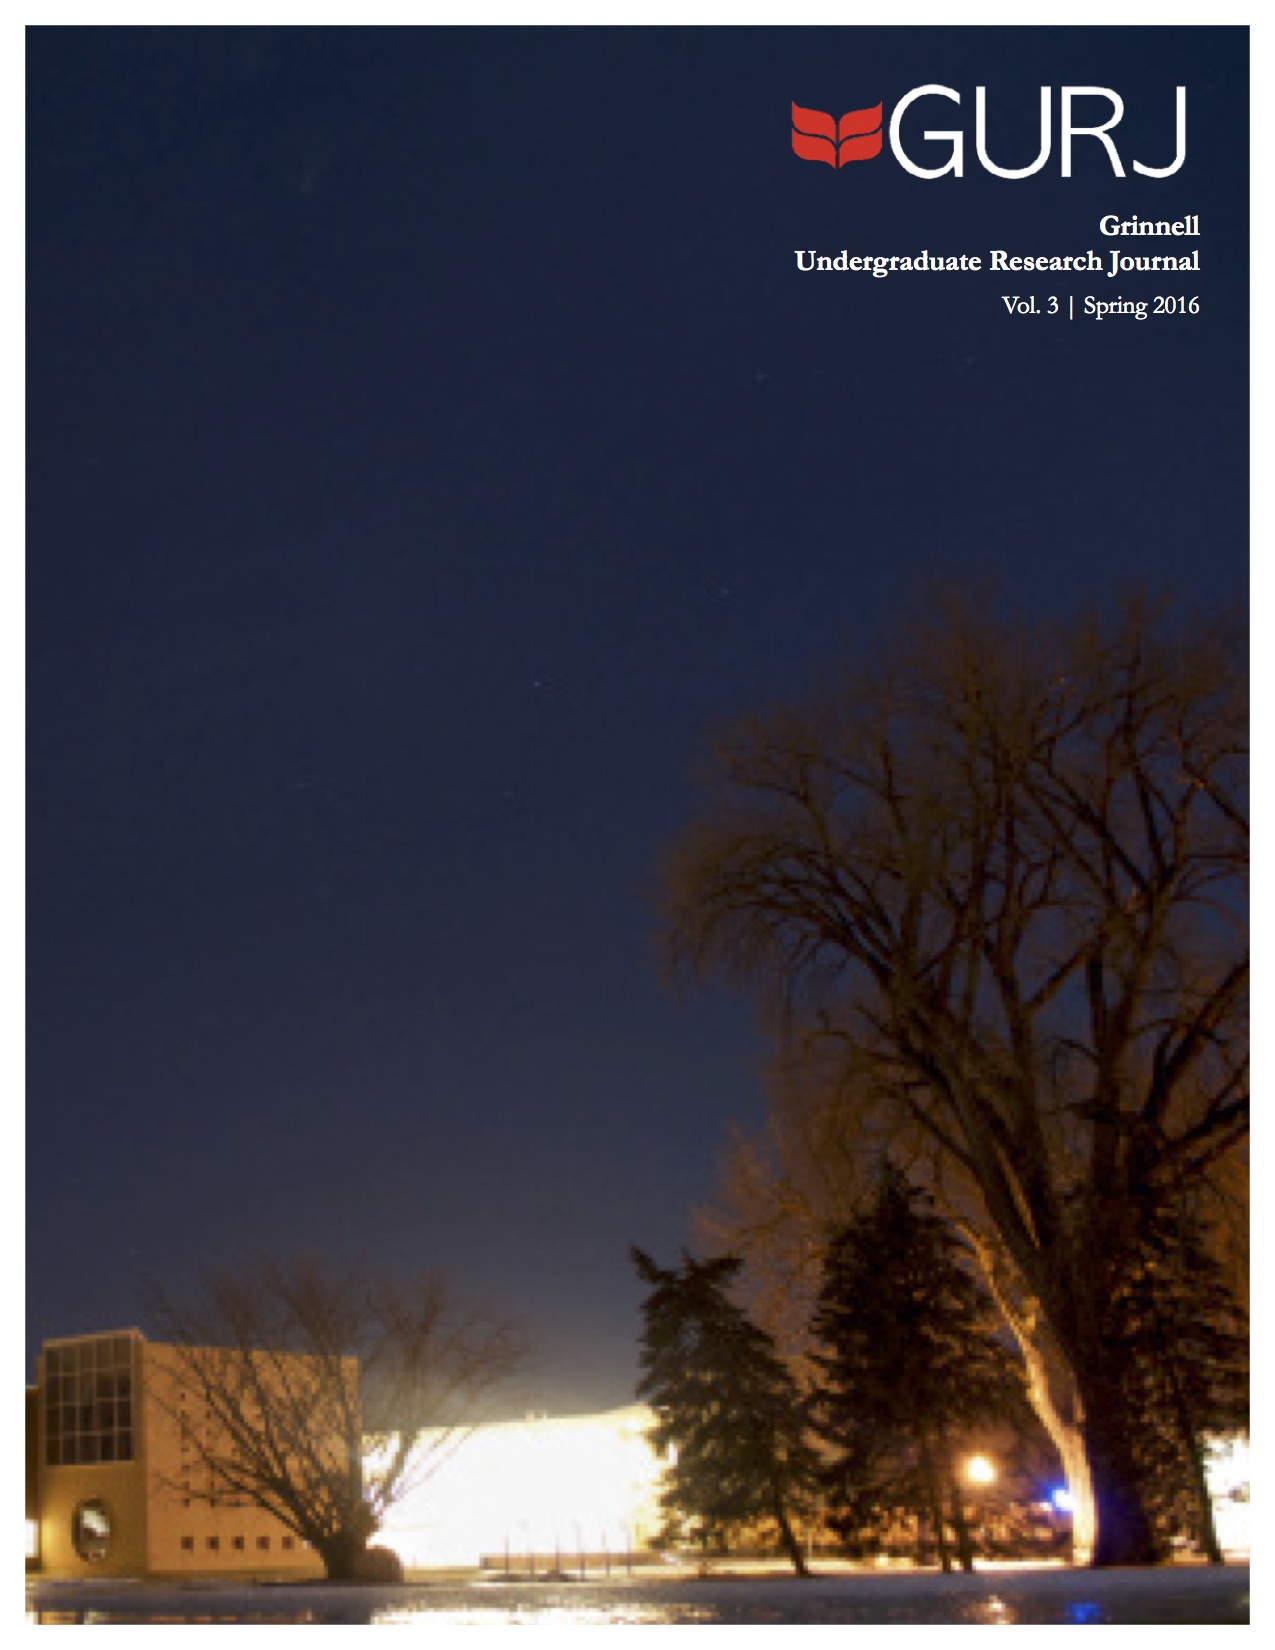 Cover of the Grinnell Undergraduate Research Journal. Pictured: view of campus at night.